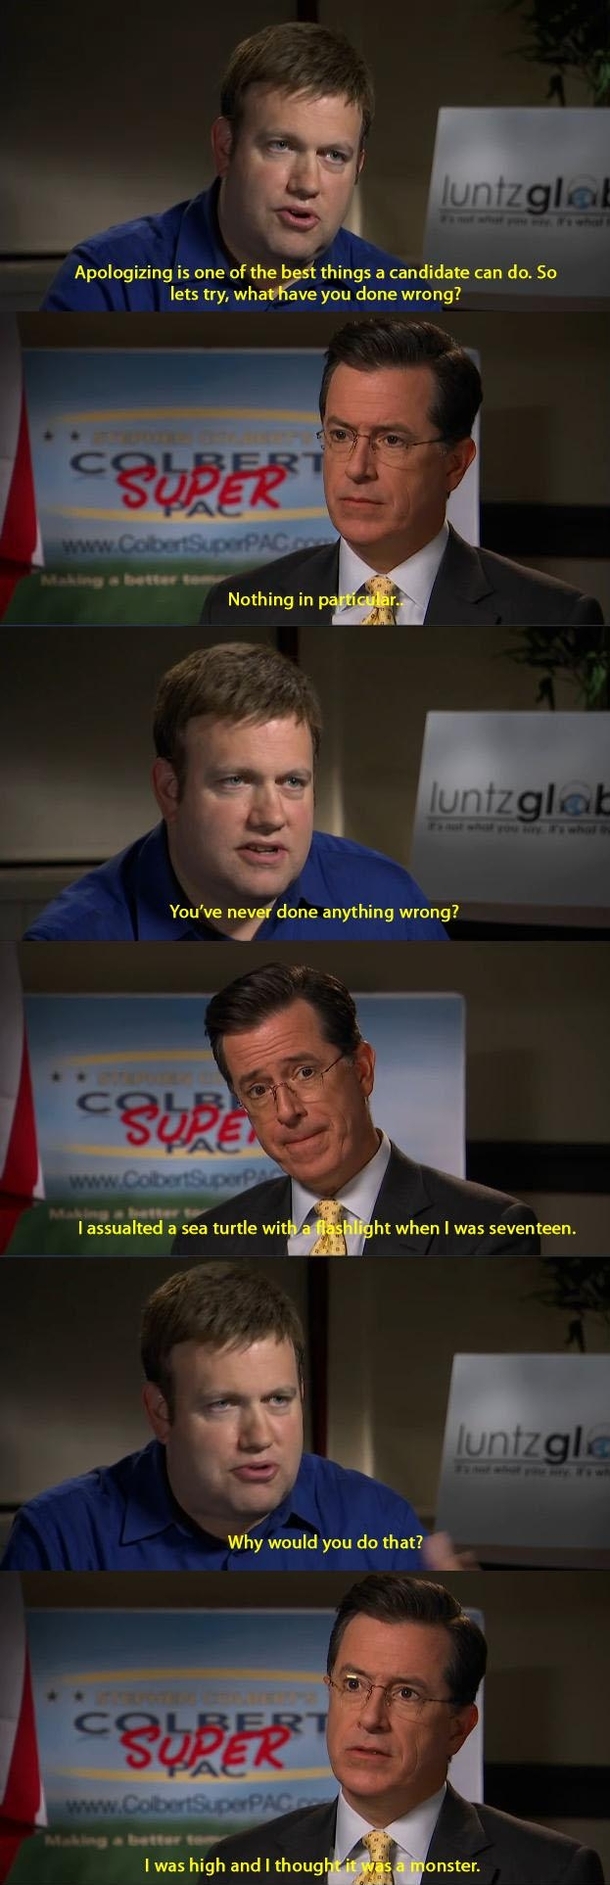 Colbert confesses to his wrongdoings